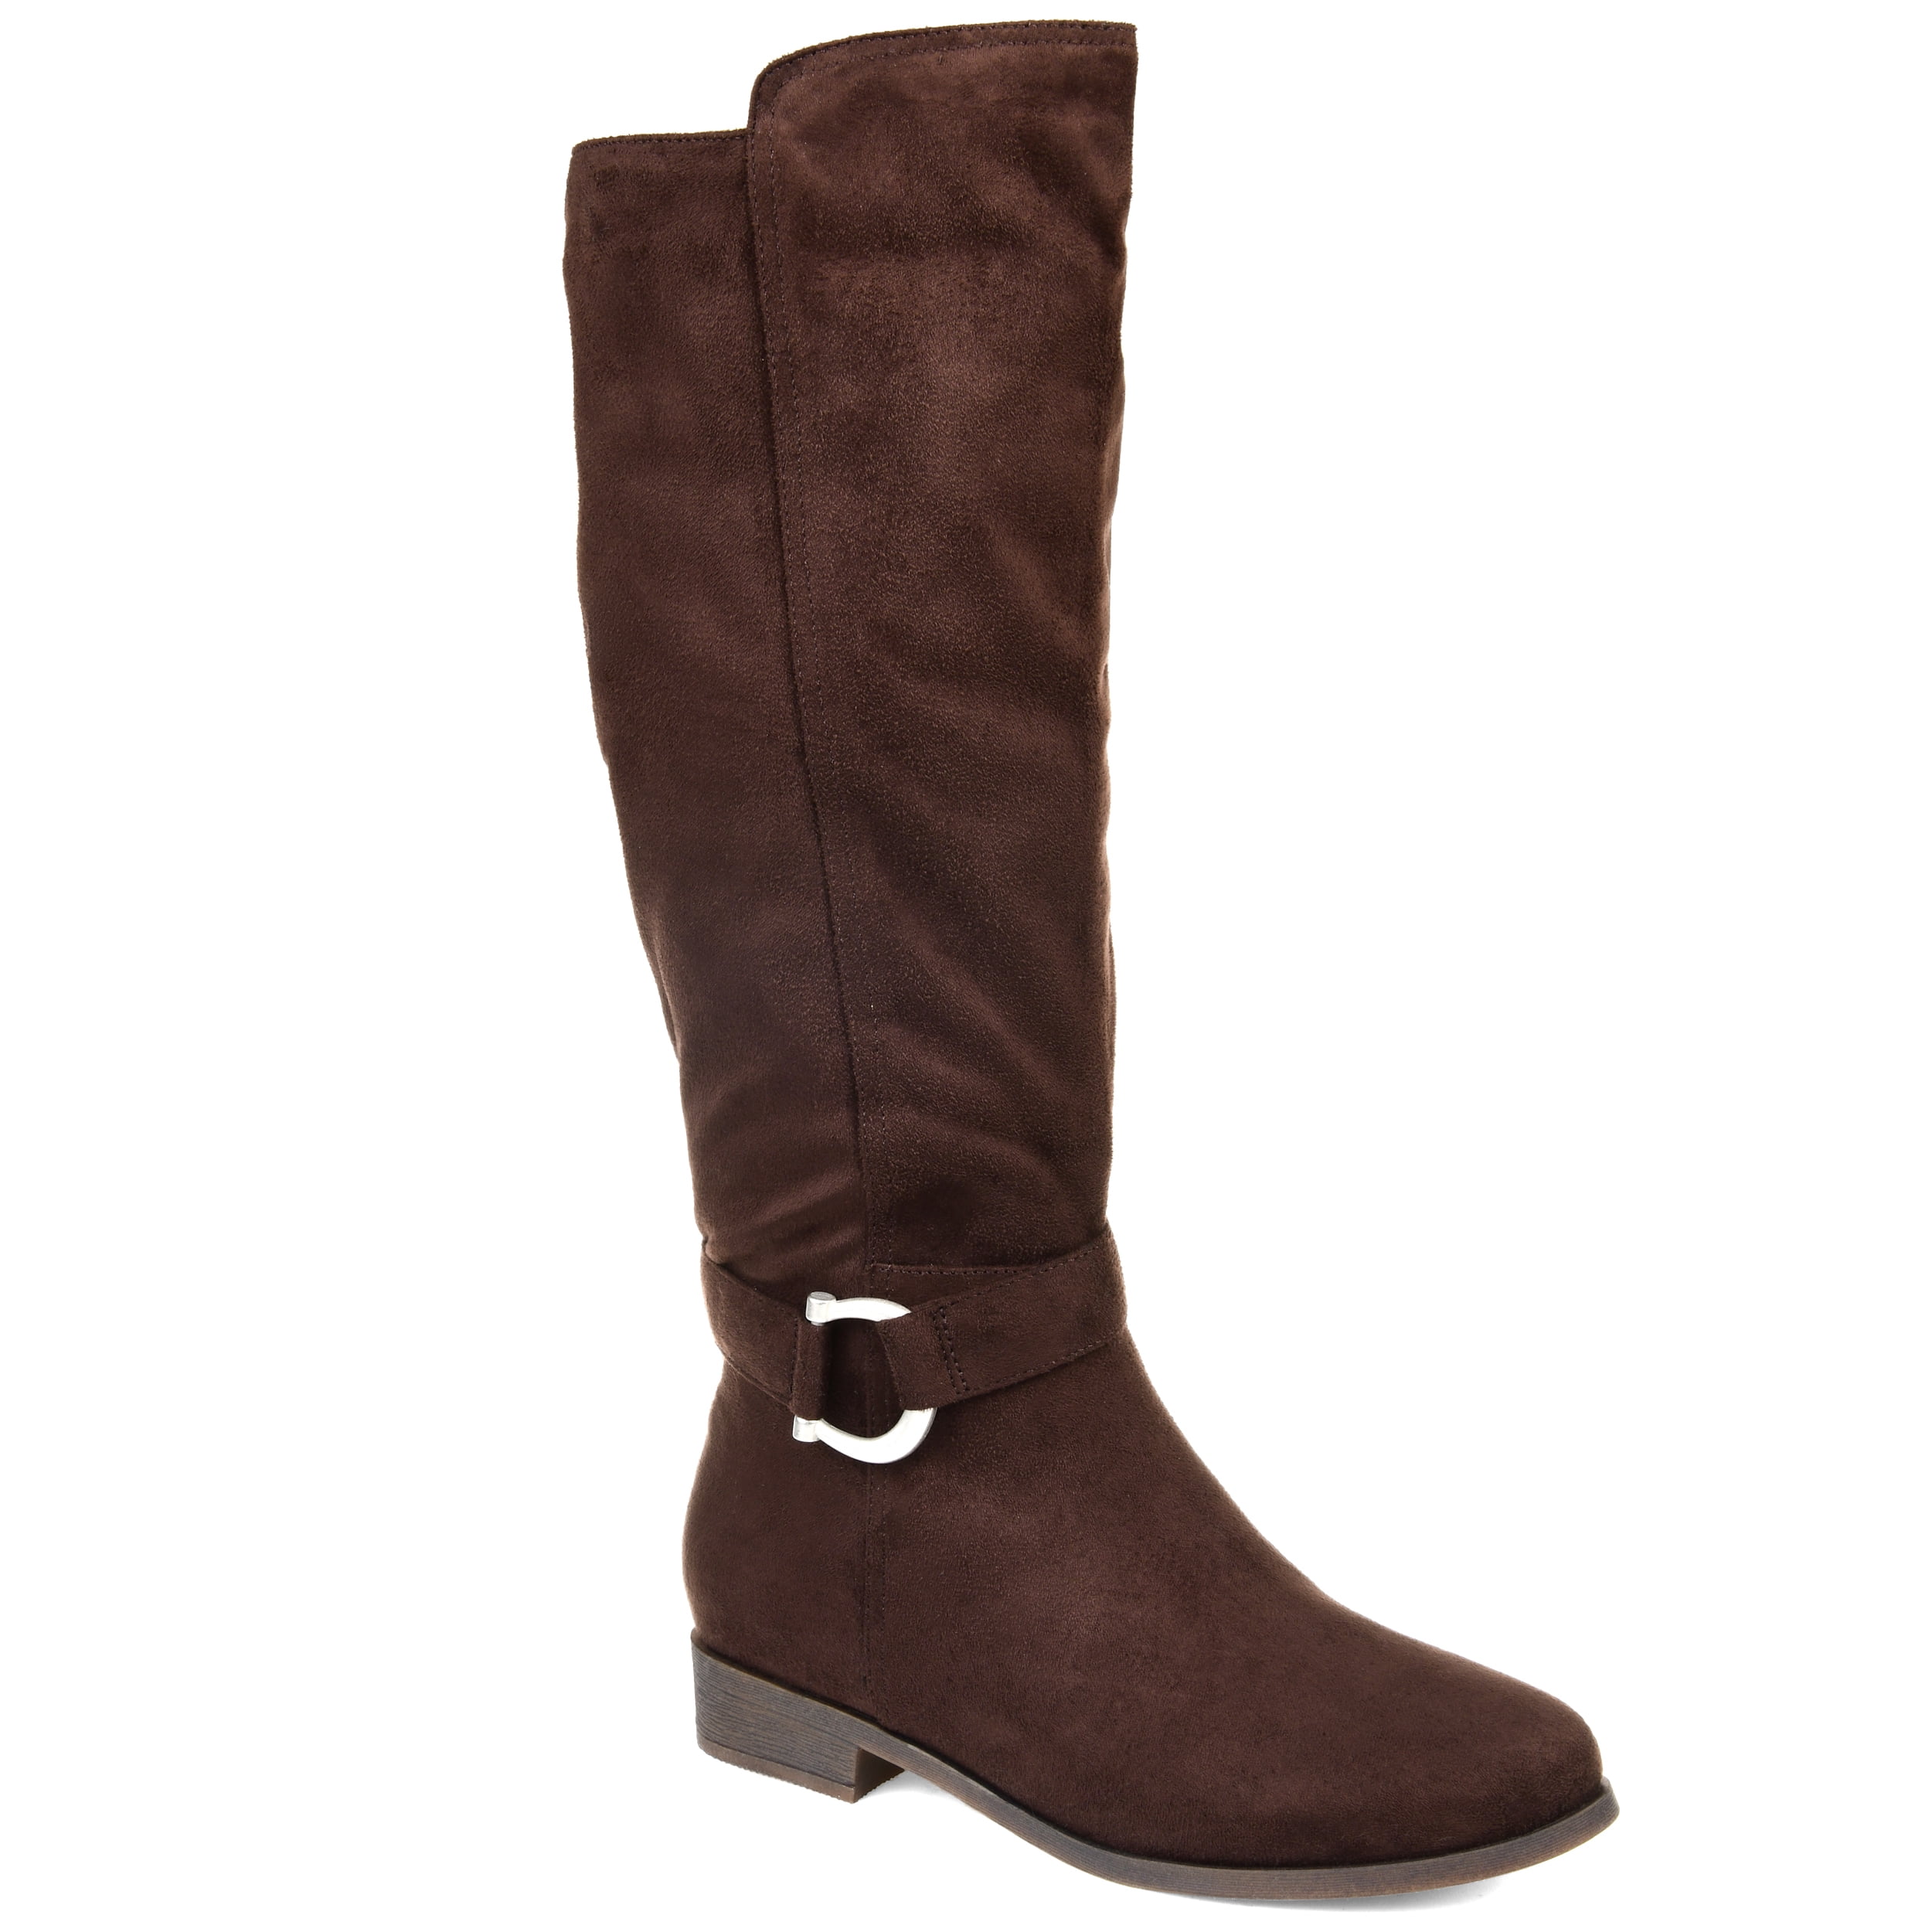 Brinley Co. - Brinley Co. Womens Comfort Extra Wide Calf Classic Riding ...